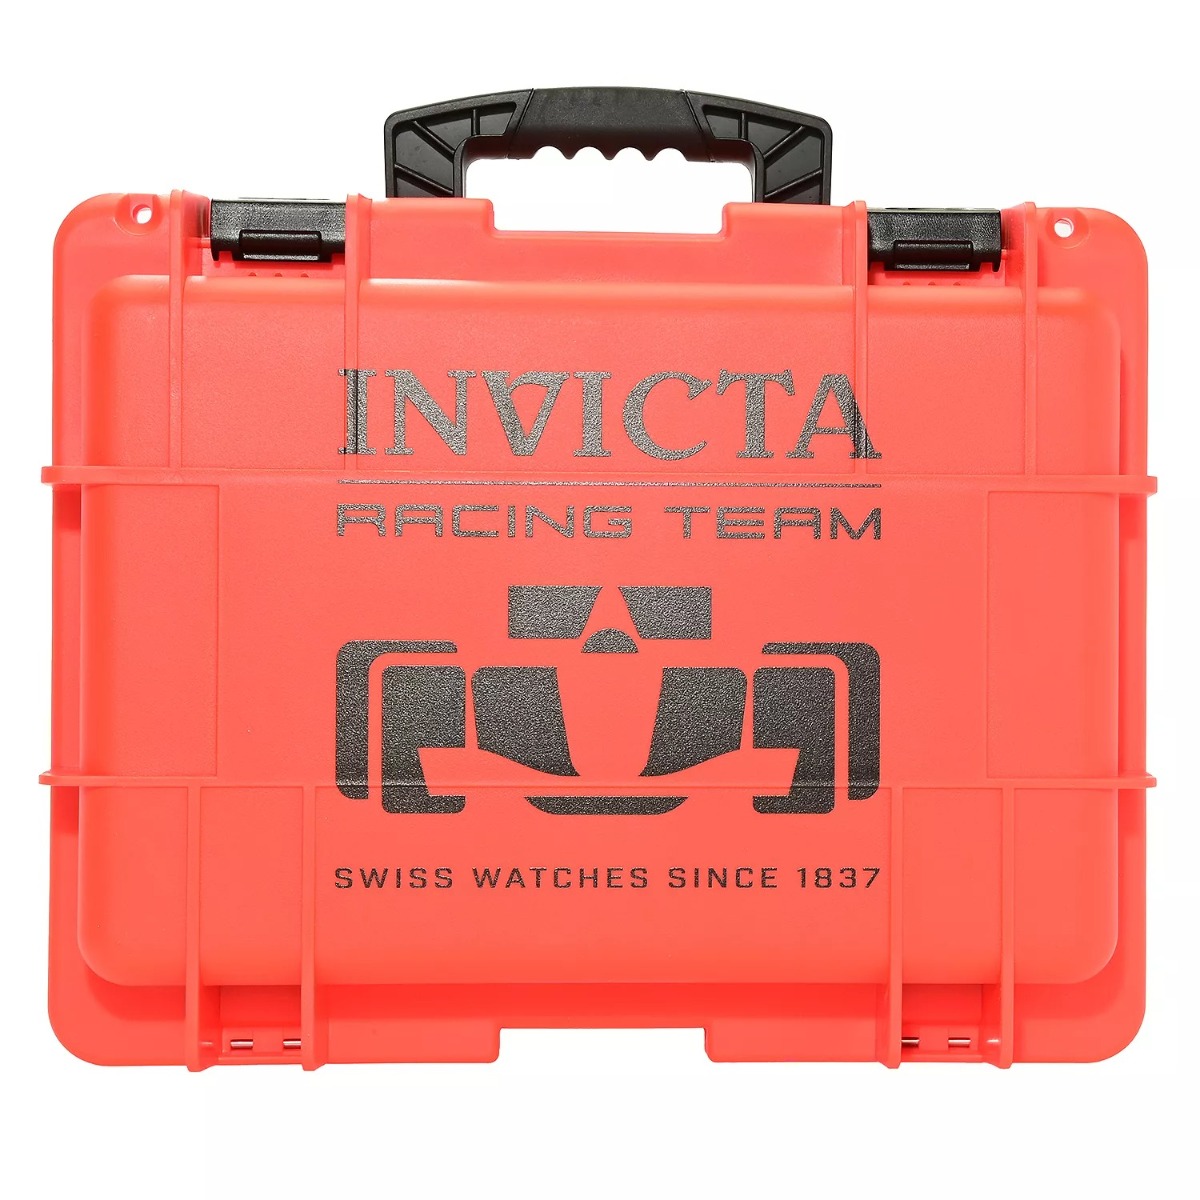 Picture of Invicta DC8RT-RED Collectors Box 8 Slot-Red Racing Team